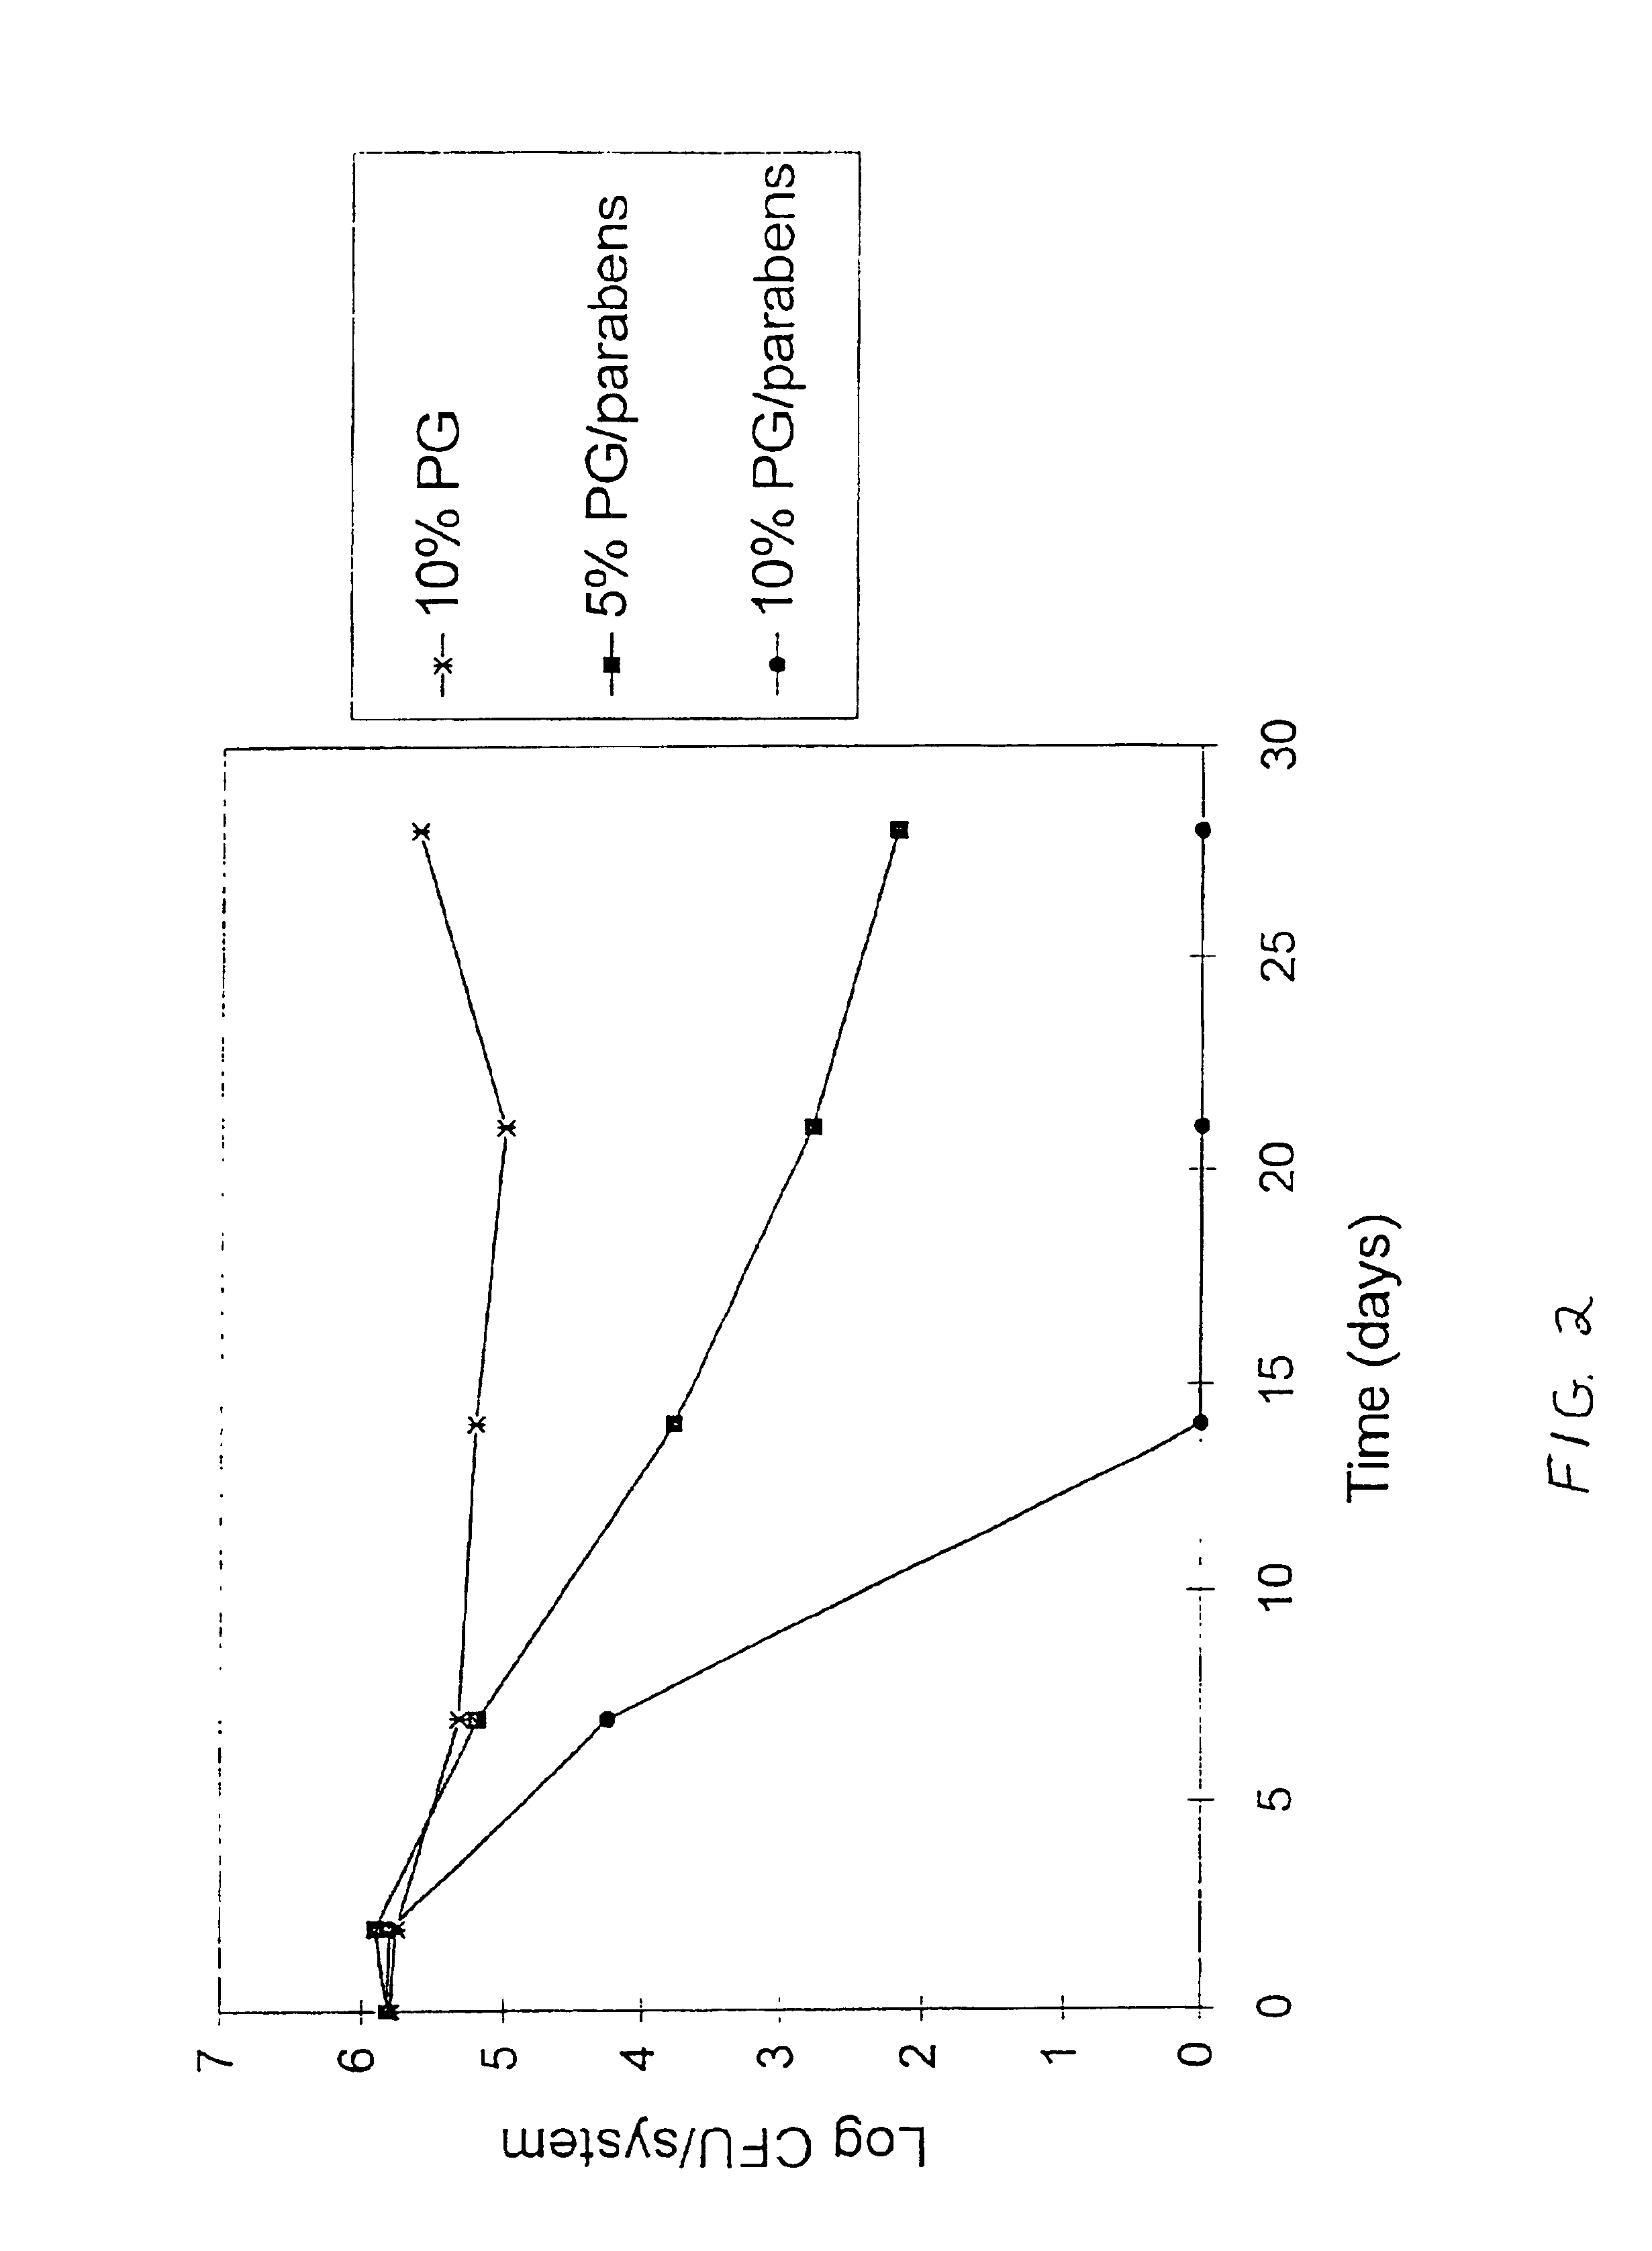 Transdermal electrotransport delivery device including an antimicrobial compatible reservoir composition